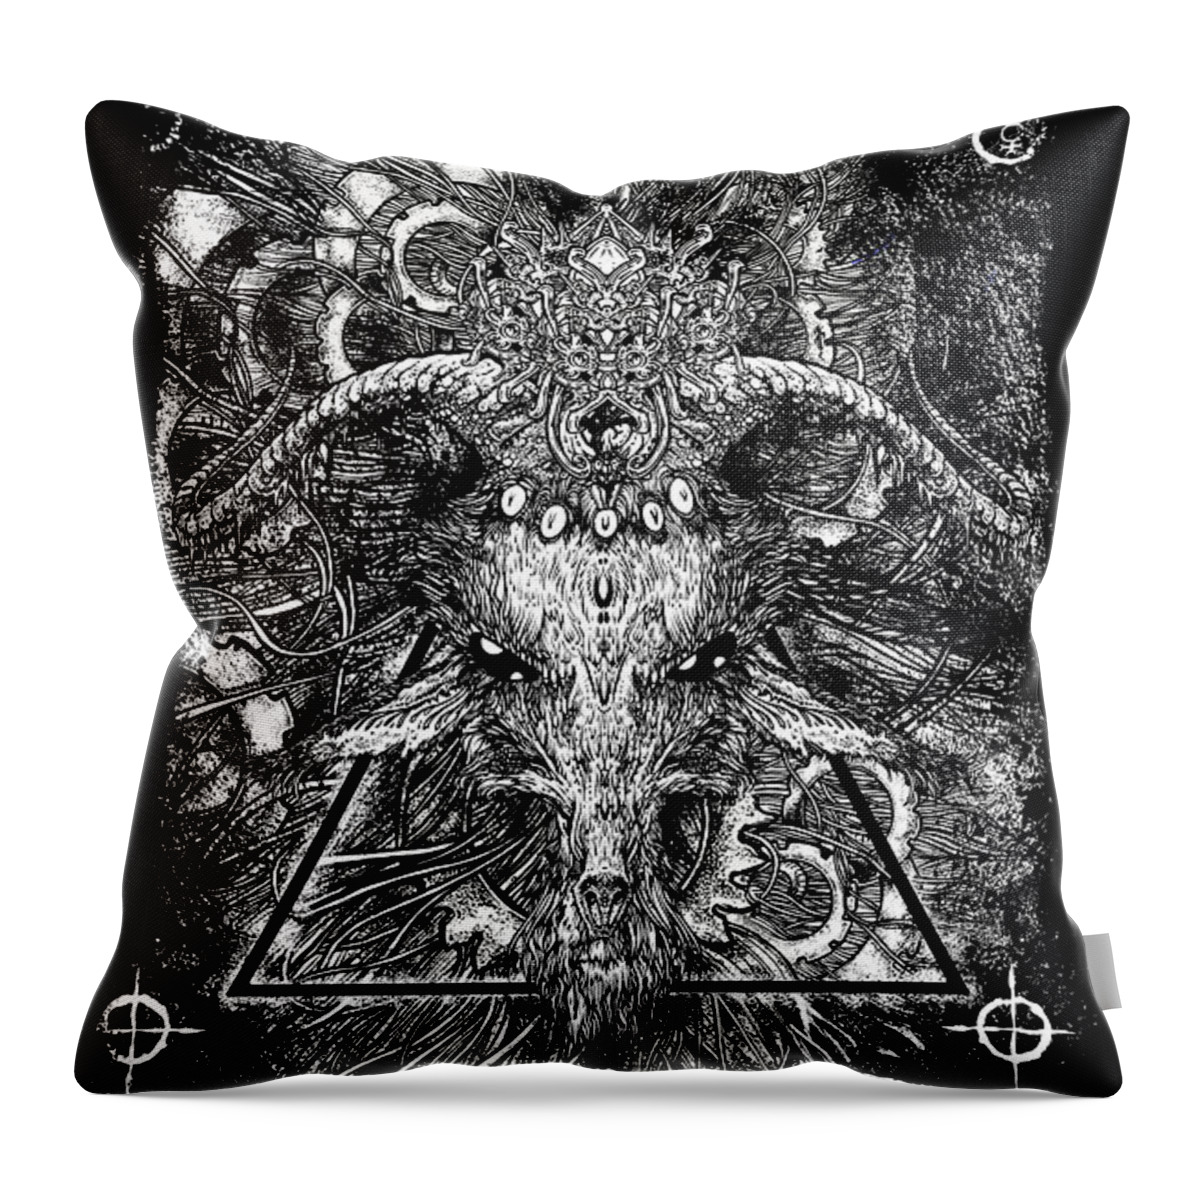 Baphomet Throw Pillow featuring the drawing Portal Sorcery by Thomas Ambrose DENNEY